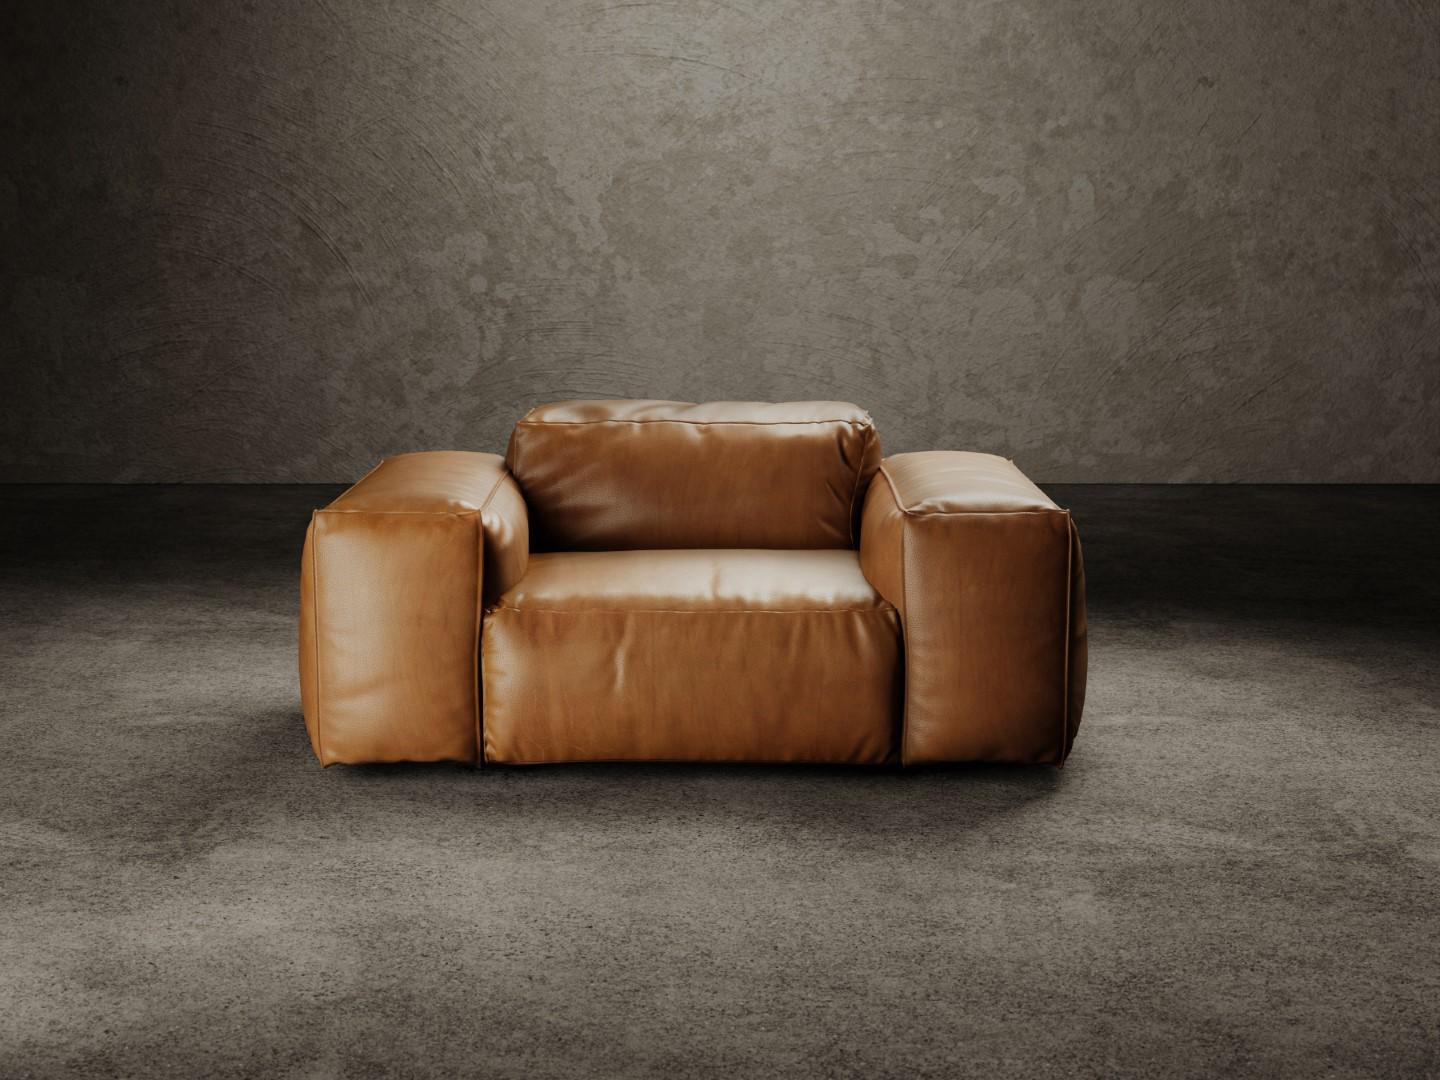 RENCONTRE MOI armchair is composed of a wooden shell padded with different densities polyurethane foam with a top layer mixed with goose feather. The armchair is completely covered in fabric or leather. The shapes of Rencontre Moi unveiled by